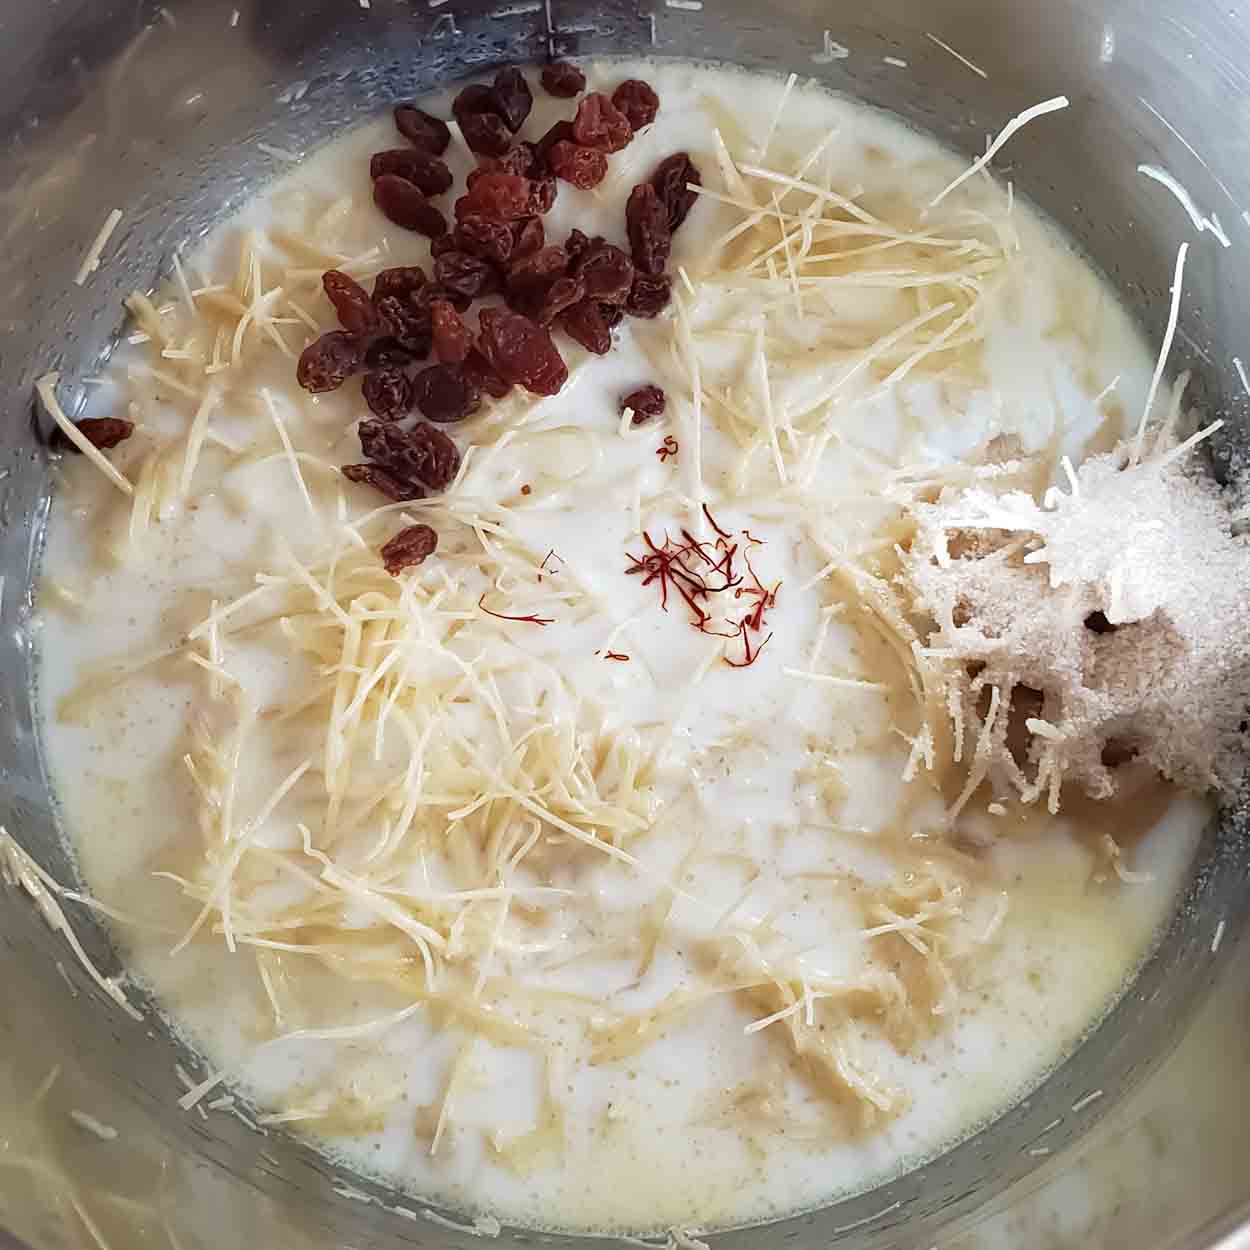 Adding all the ingredients to make the Easy Kheer Recipe for Diwali Desserts.